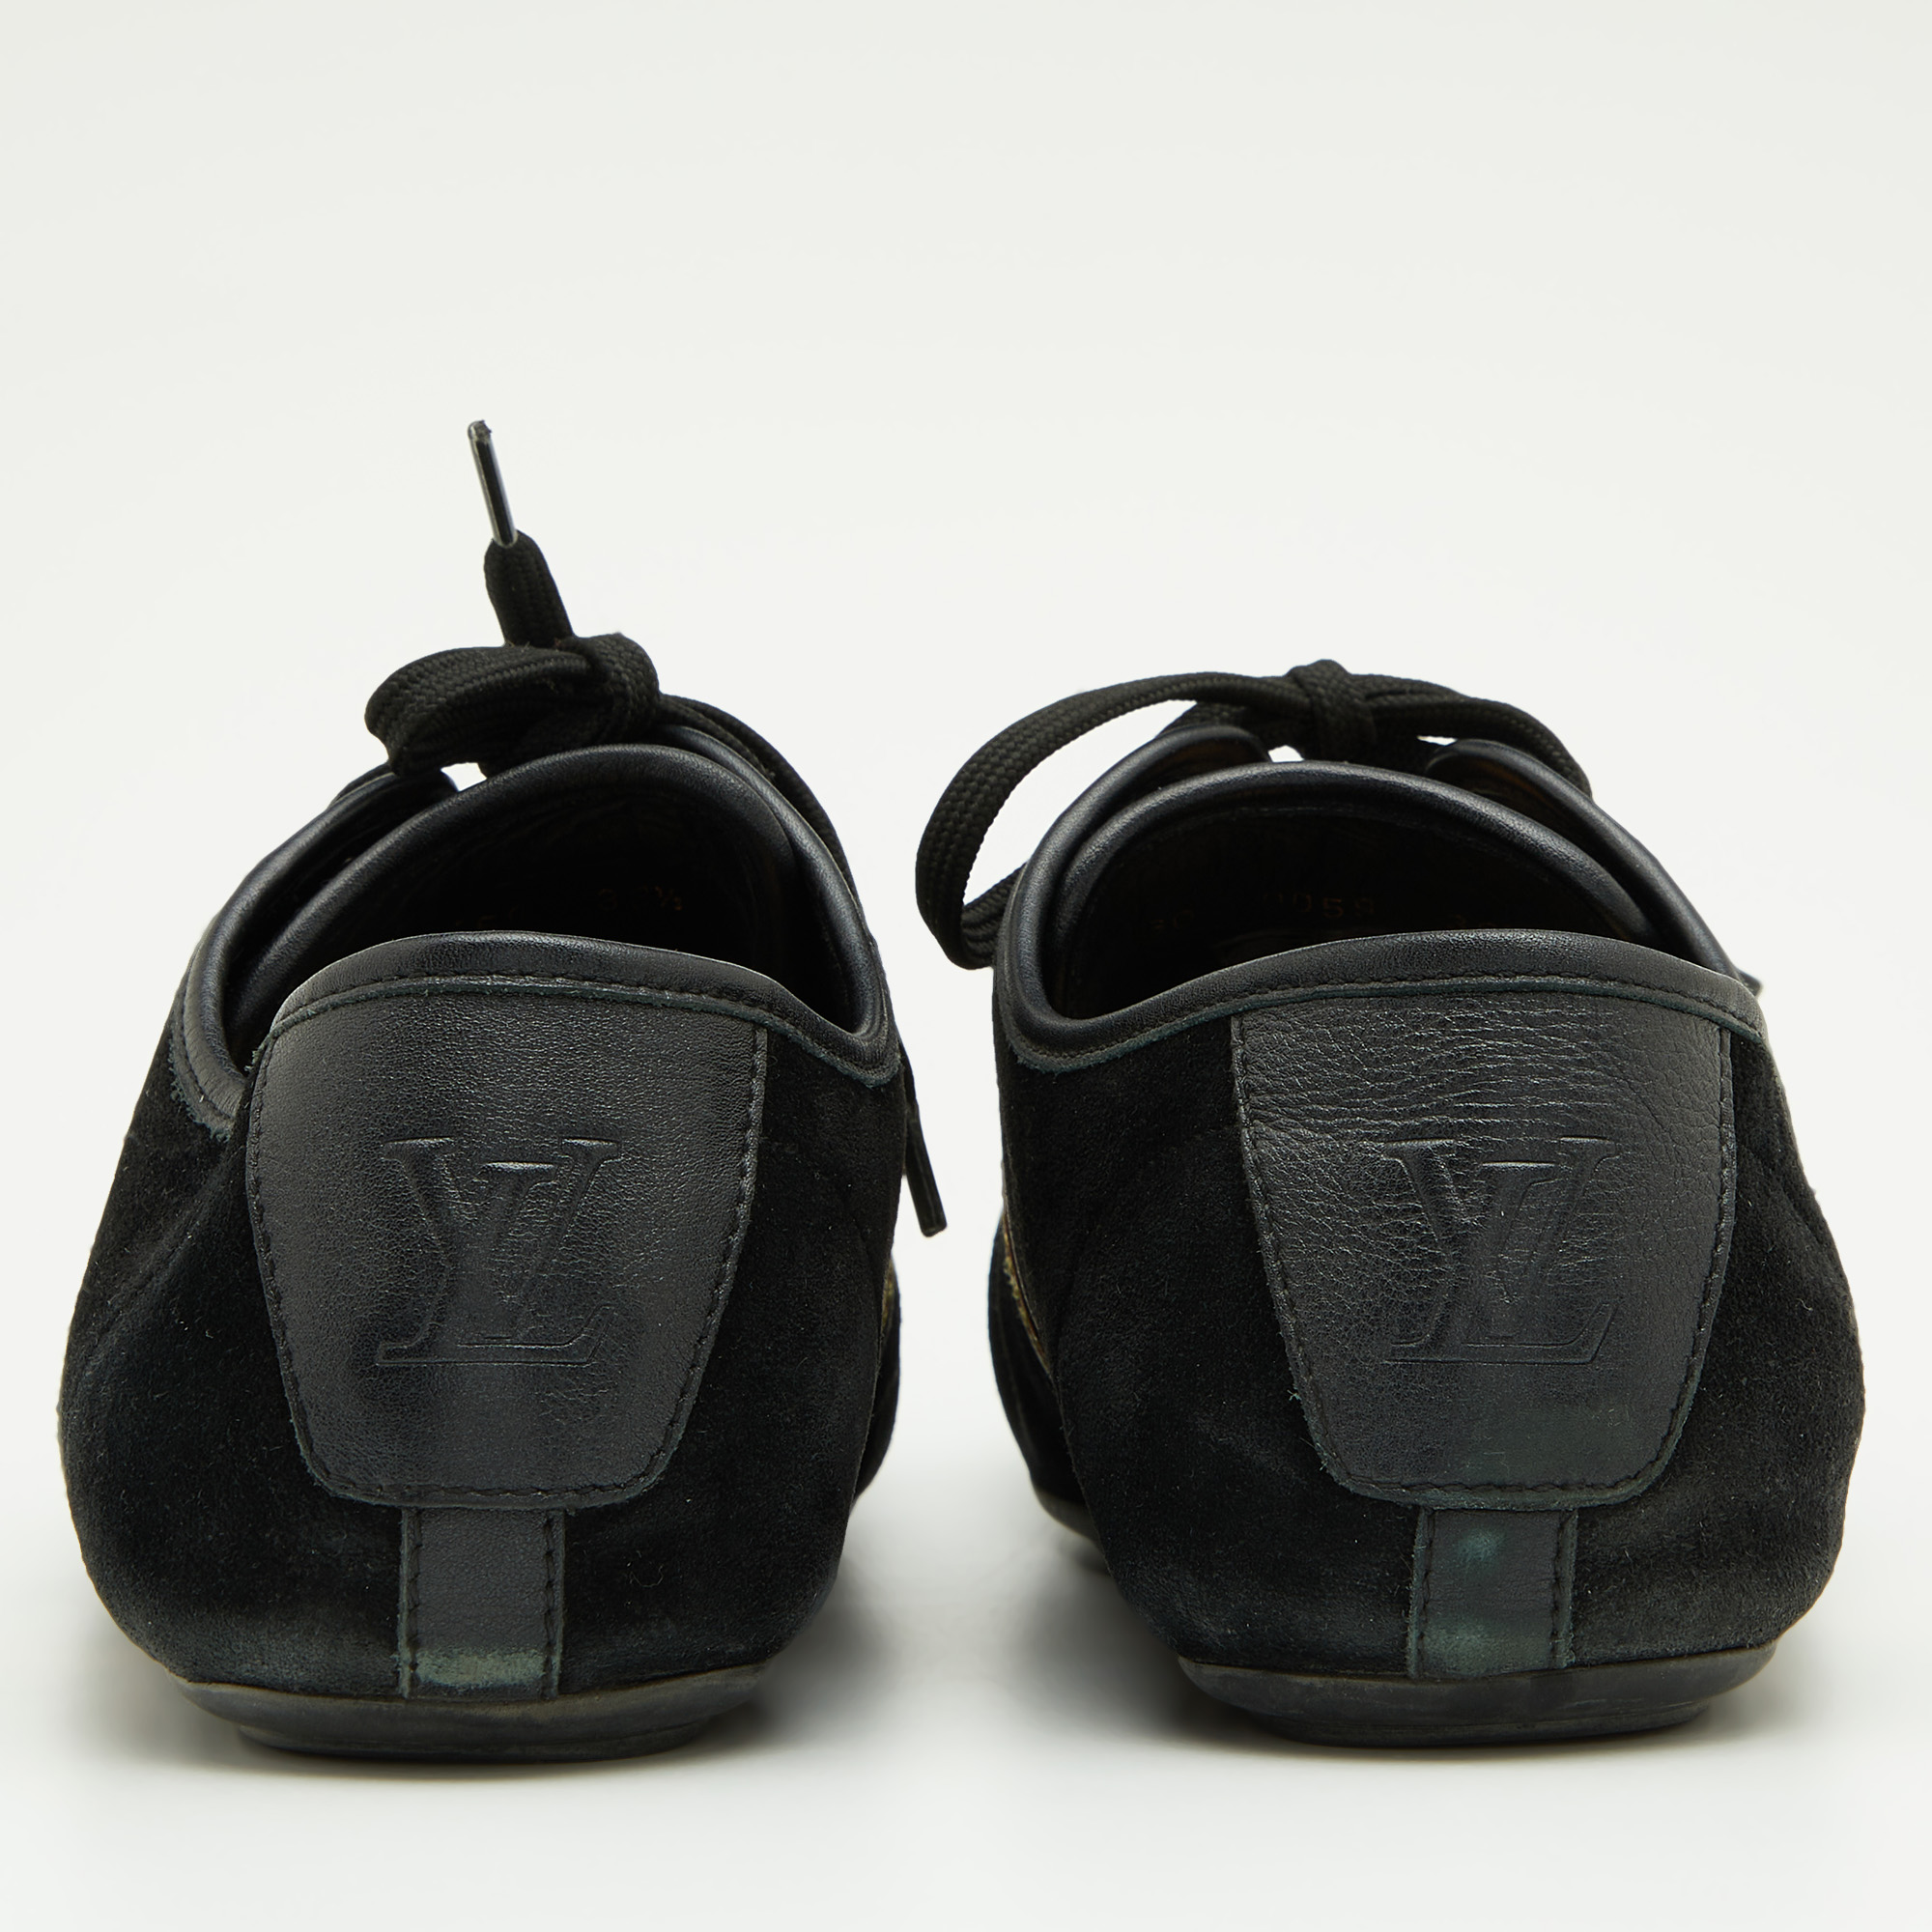 Louis Vuitton Black Leather And Suede Low Top Sneakers Size 38.5